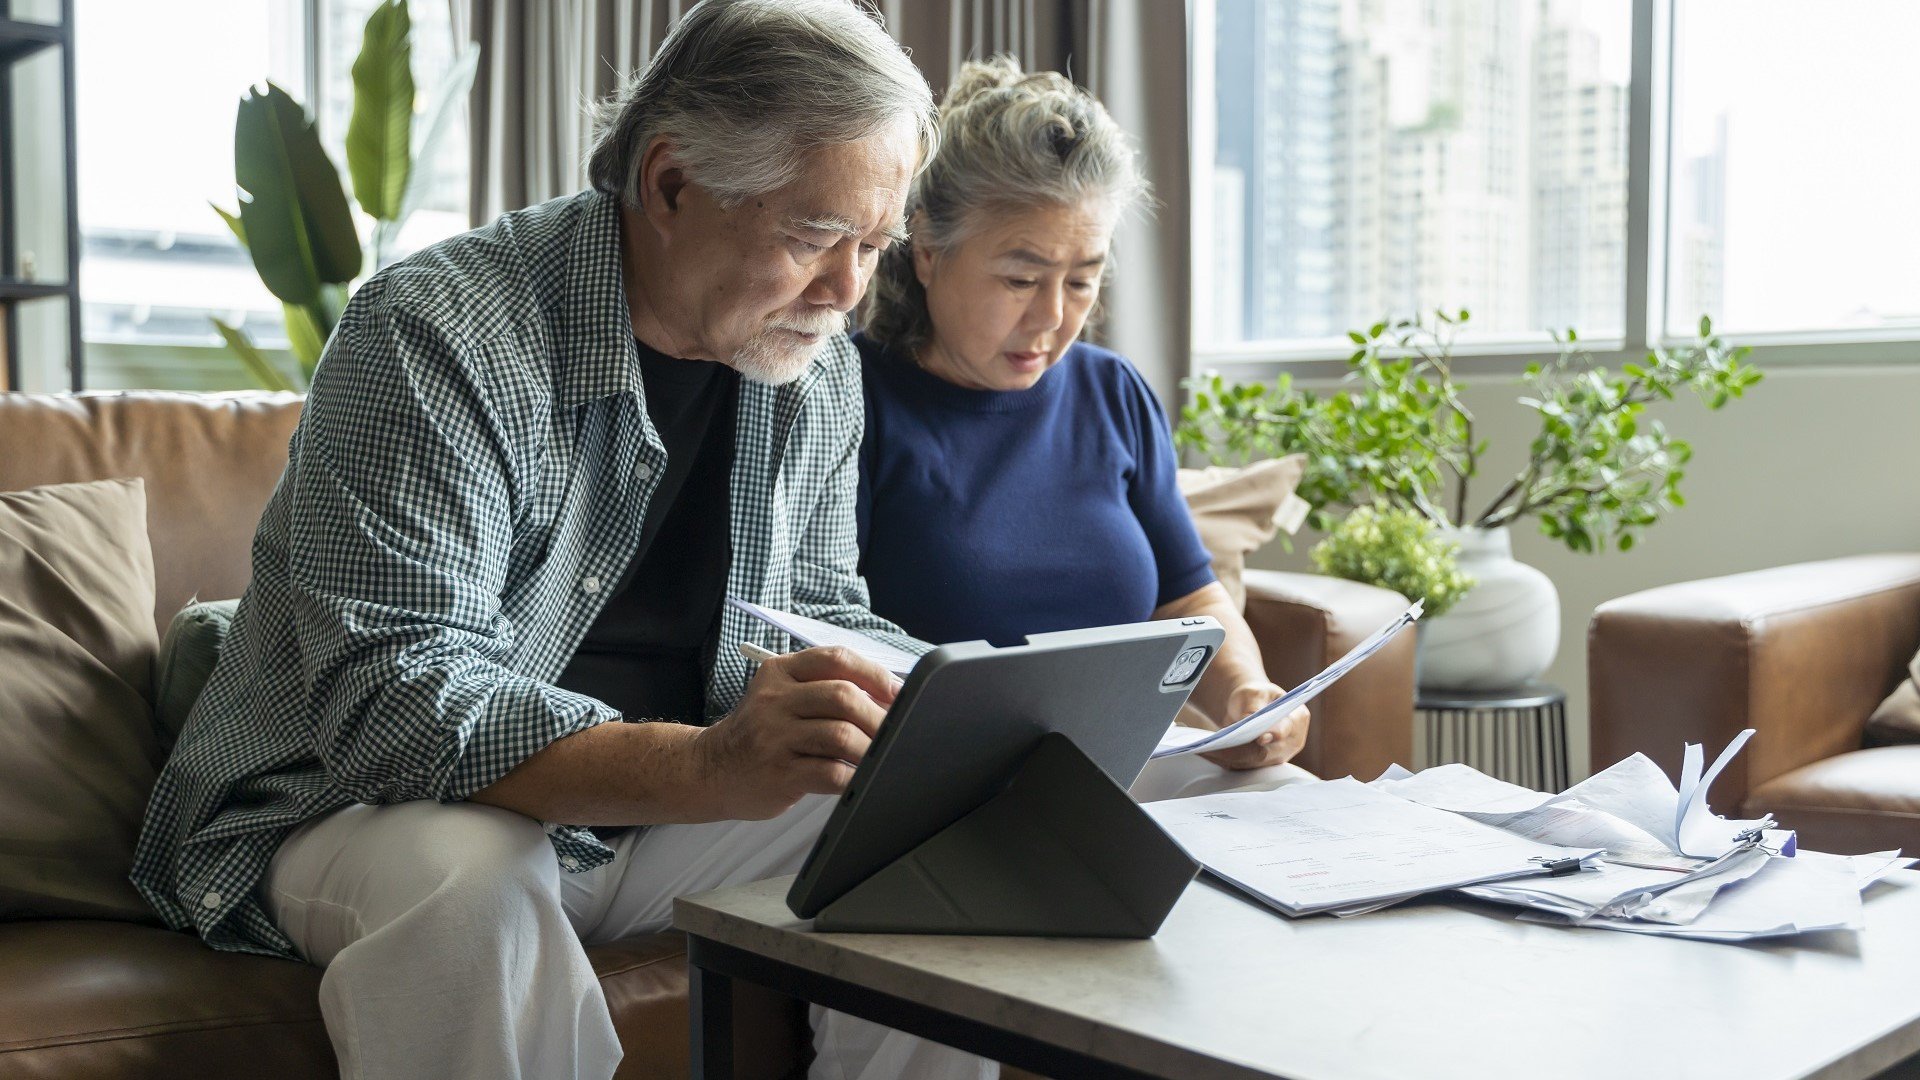 8 Purchases Retirees Almost Always Regret